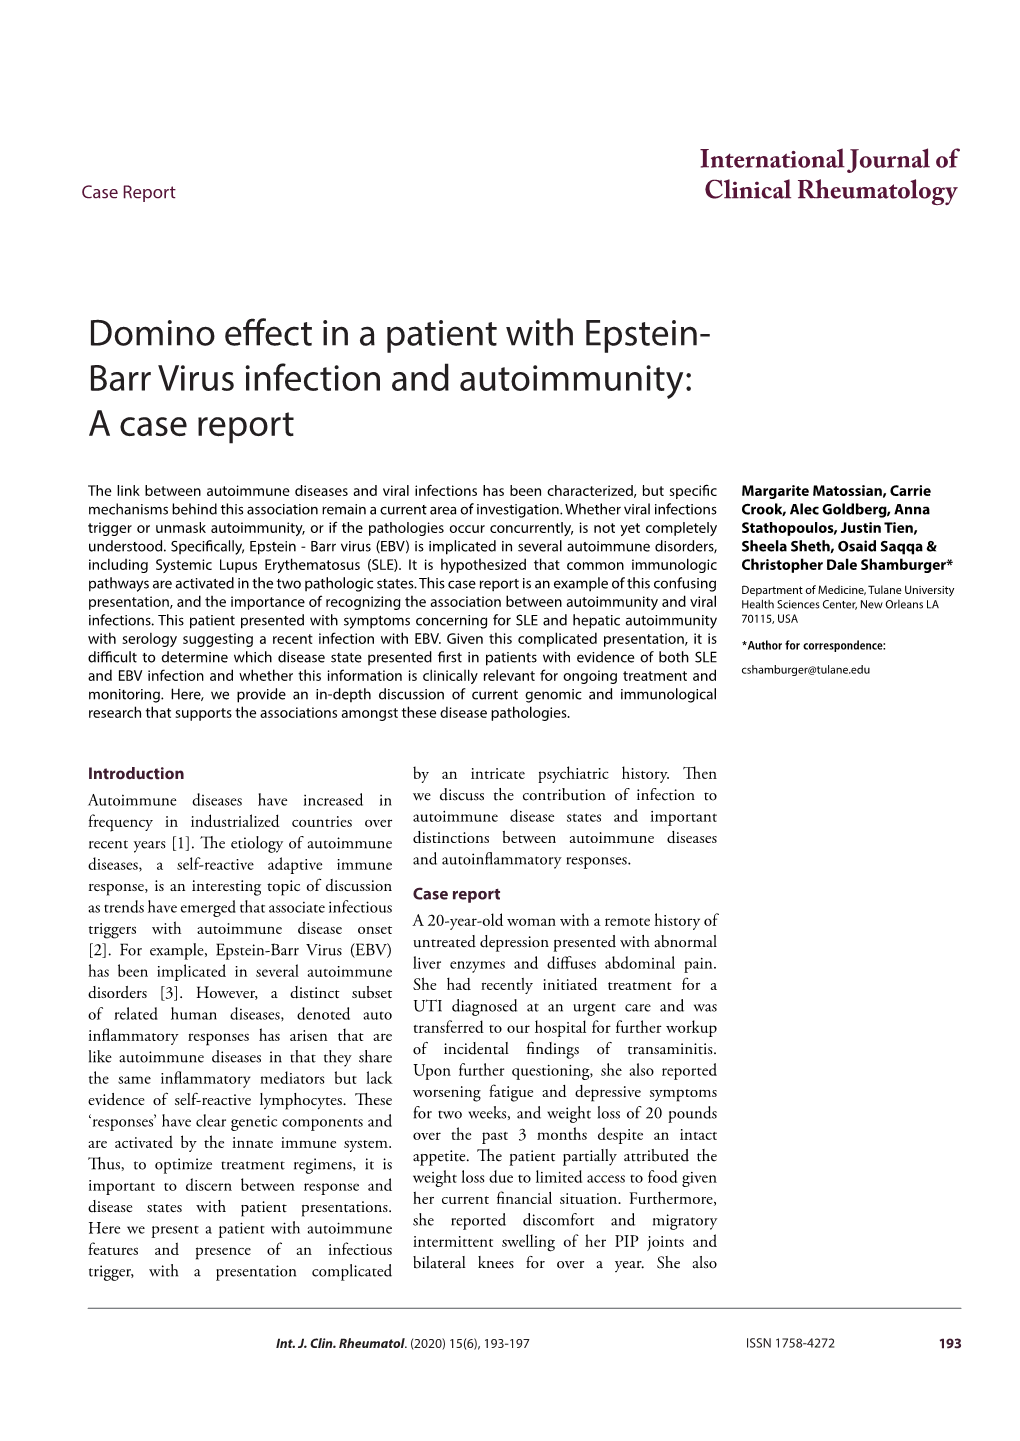 Domino Effect in a Patient with Epstein-Barr Virus Infection and Autoimmunity: a Case Report Case Report Appointments Scheduled